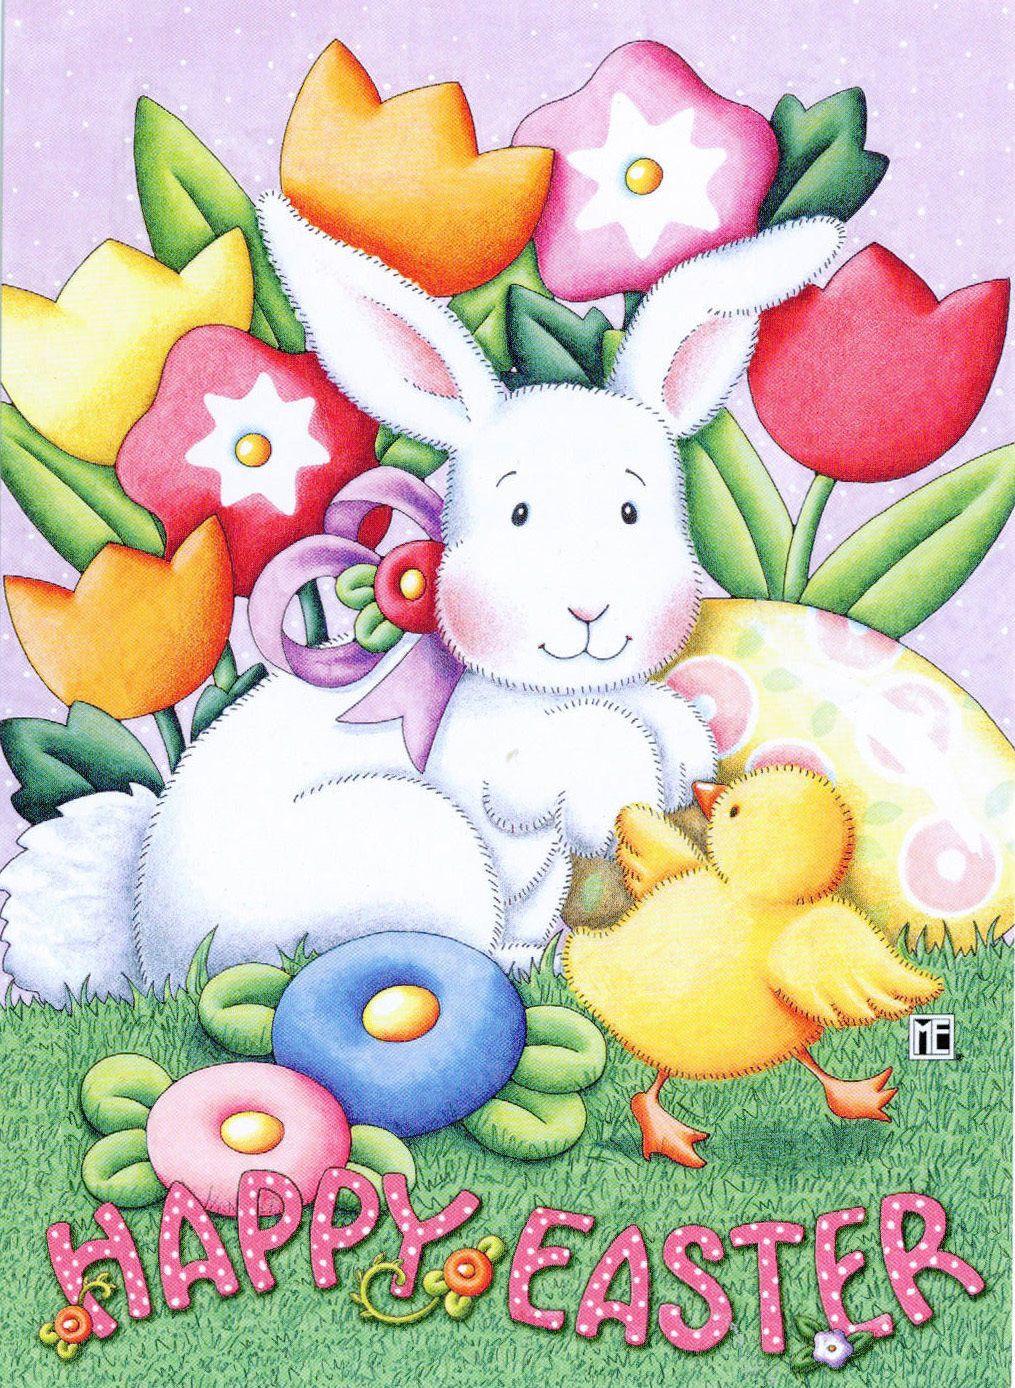 Mary Engelbreit HAPPY EASTER BUNNY CHICK TULIPS Card NEW. Mary